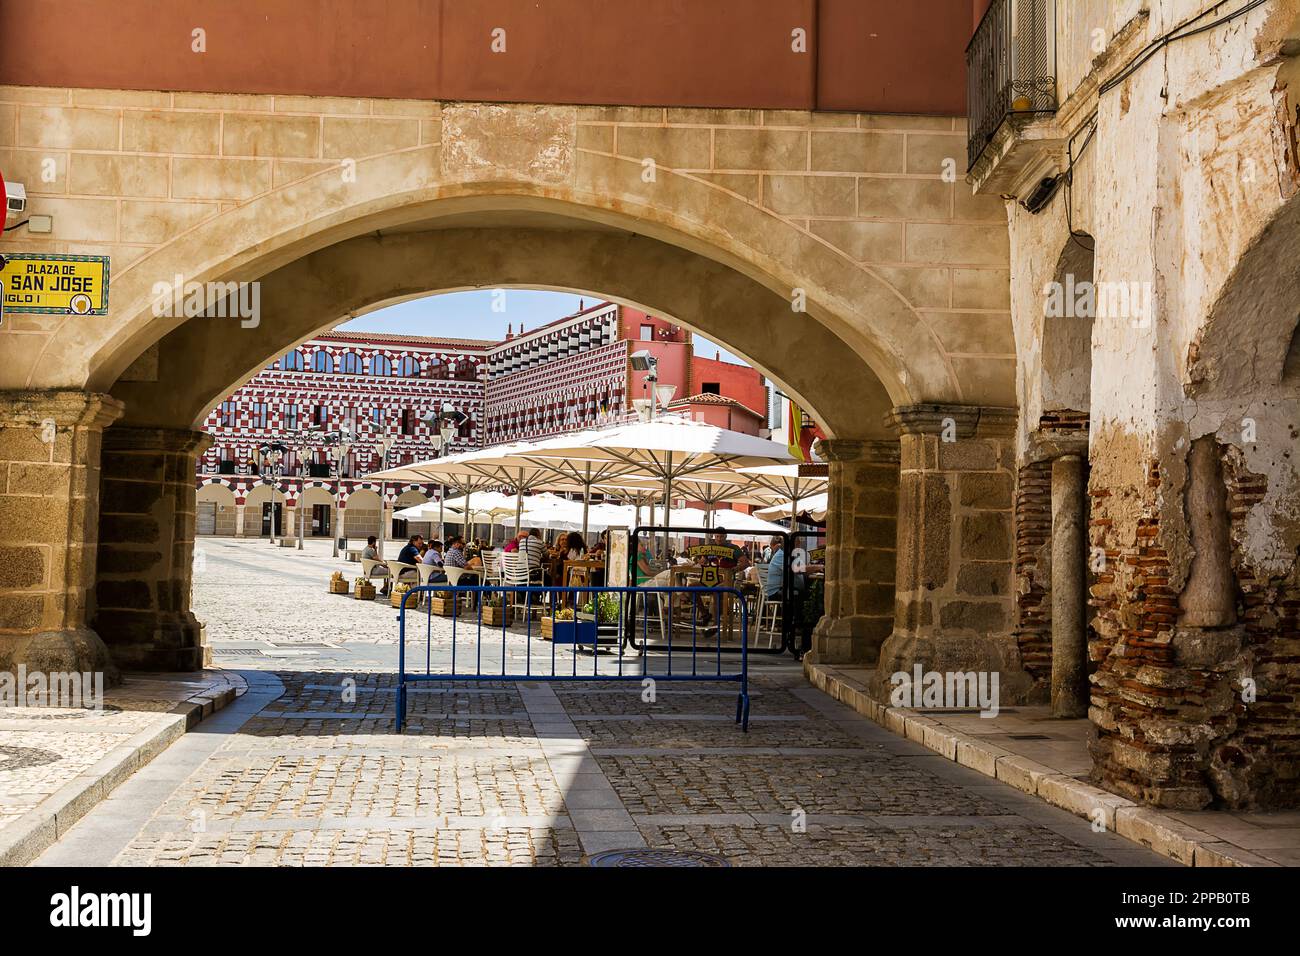 Badajoz, Spain - 24 June 2022: Facades of the colorful buildings and houses in the Alta Square in Badajoz seen from under the arch of the Peso (Spain) Stock Photo